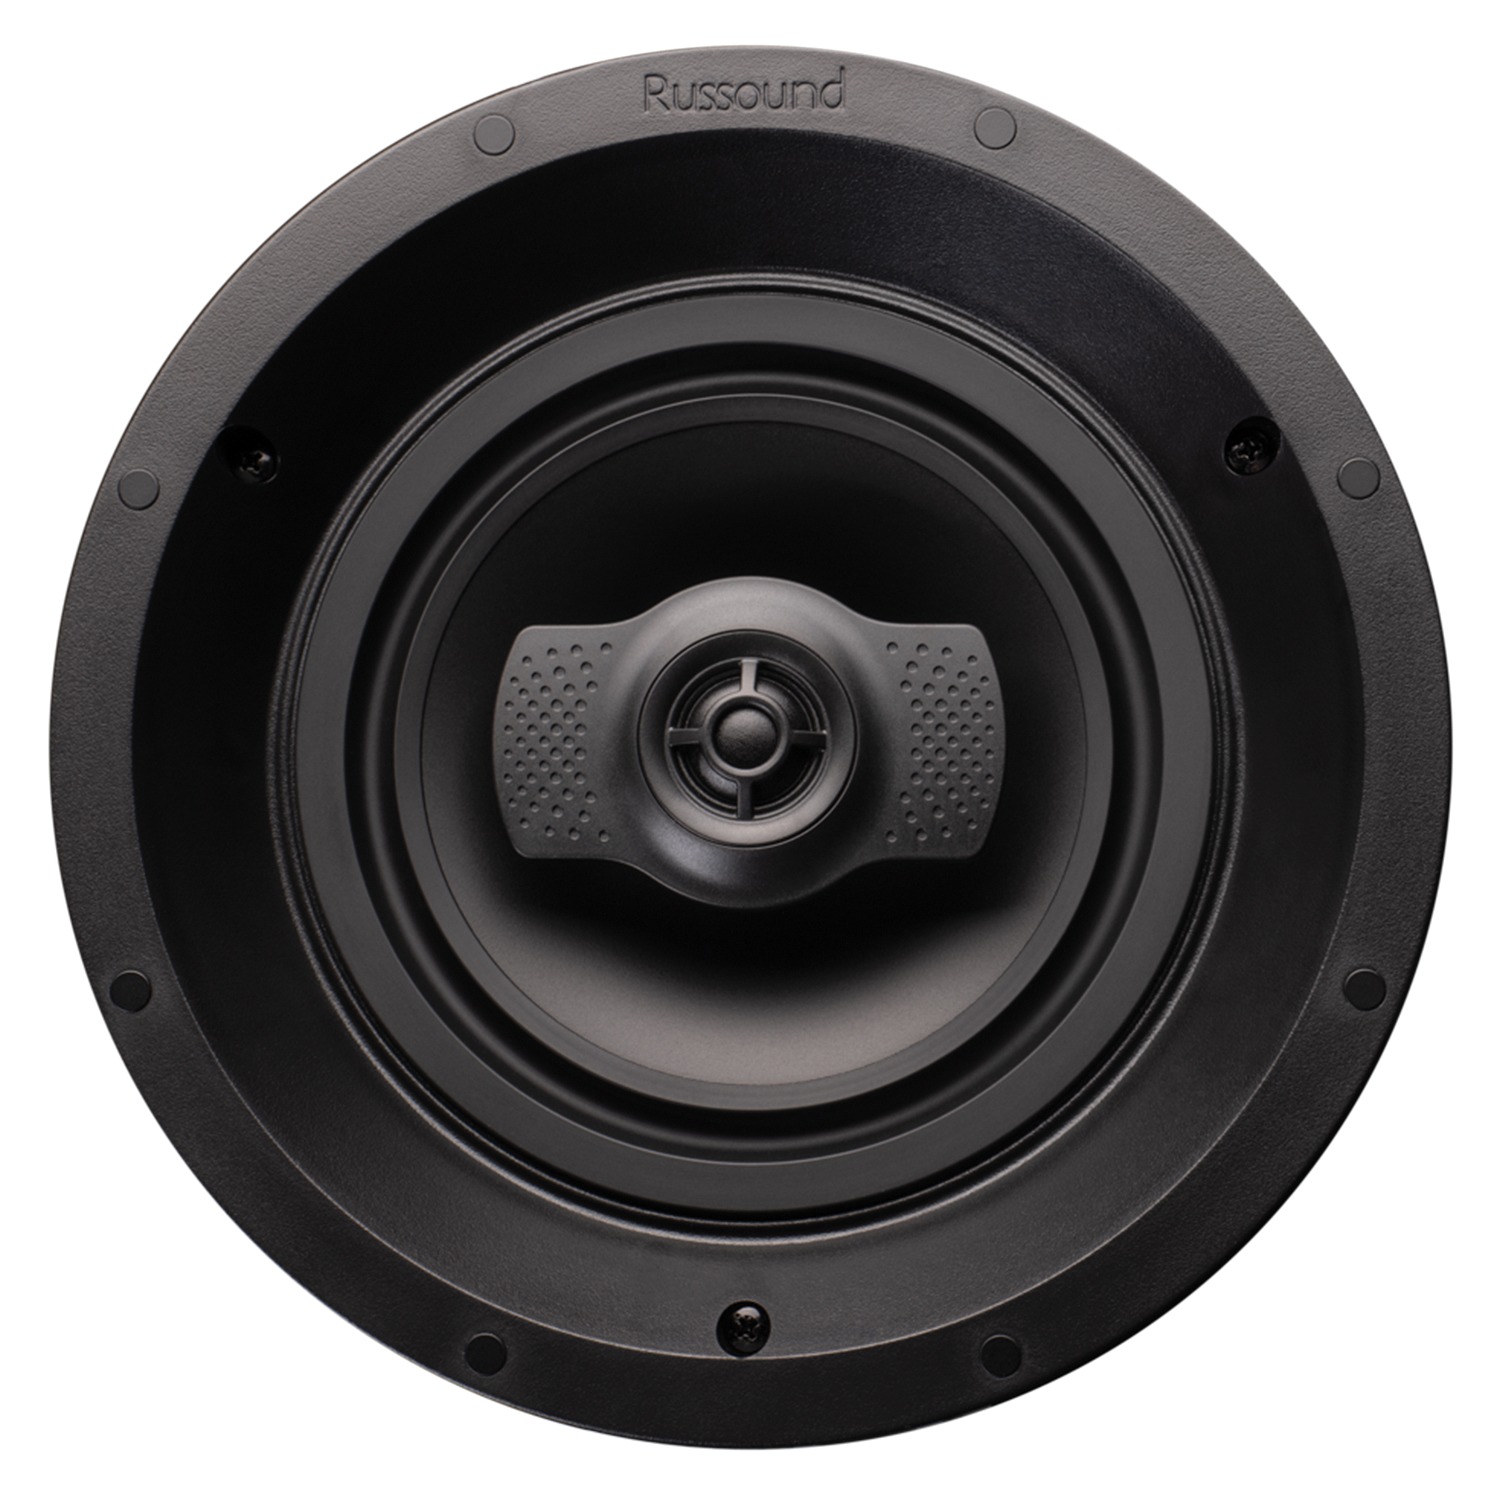 Russound IC-610 Architectural Series 6.5-Inch In-Ceiling All-Purpose Performance 2-Way Loudspeakers - image 1 of 3